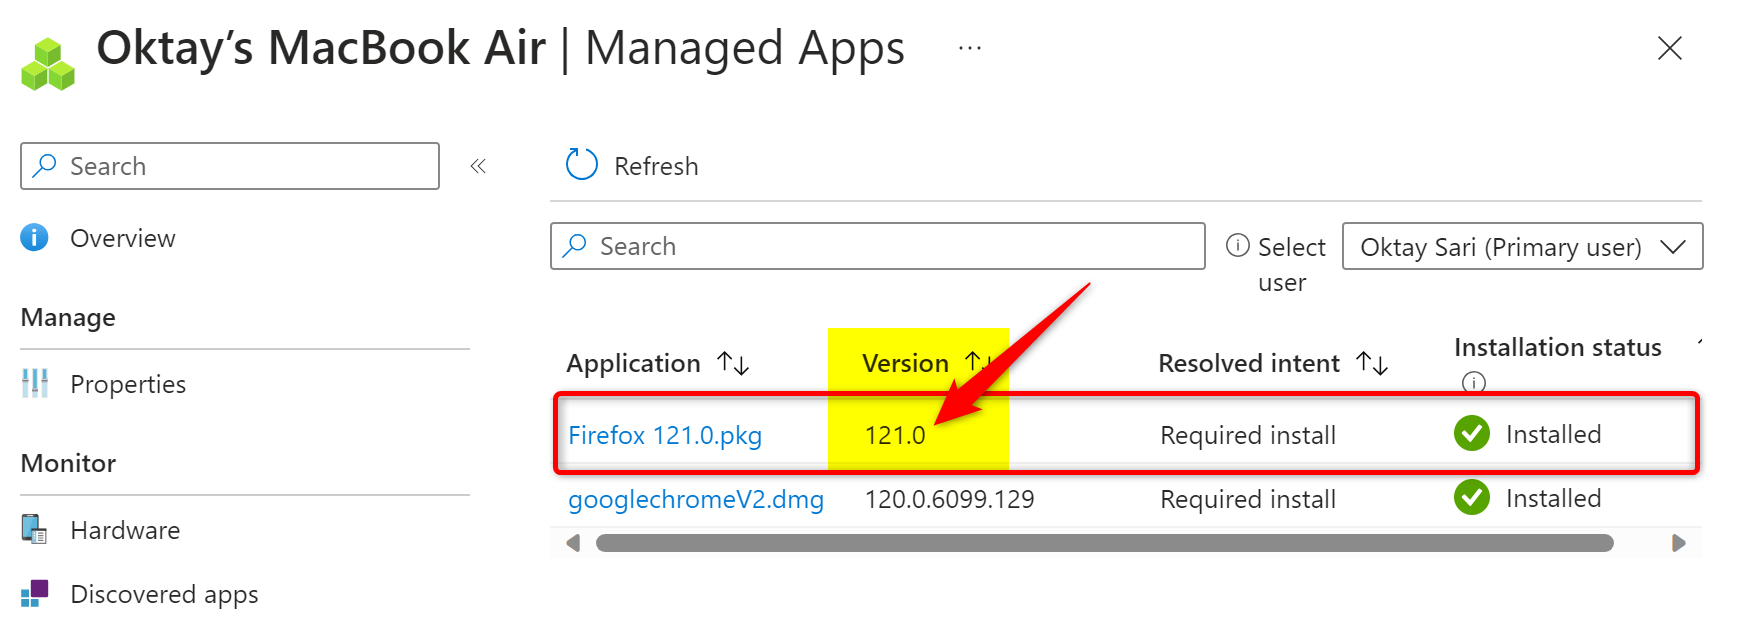 firefox version 121 deployed to mac- Intune managed apps 